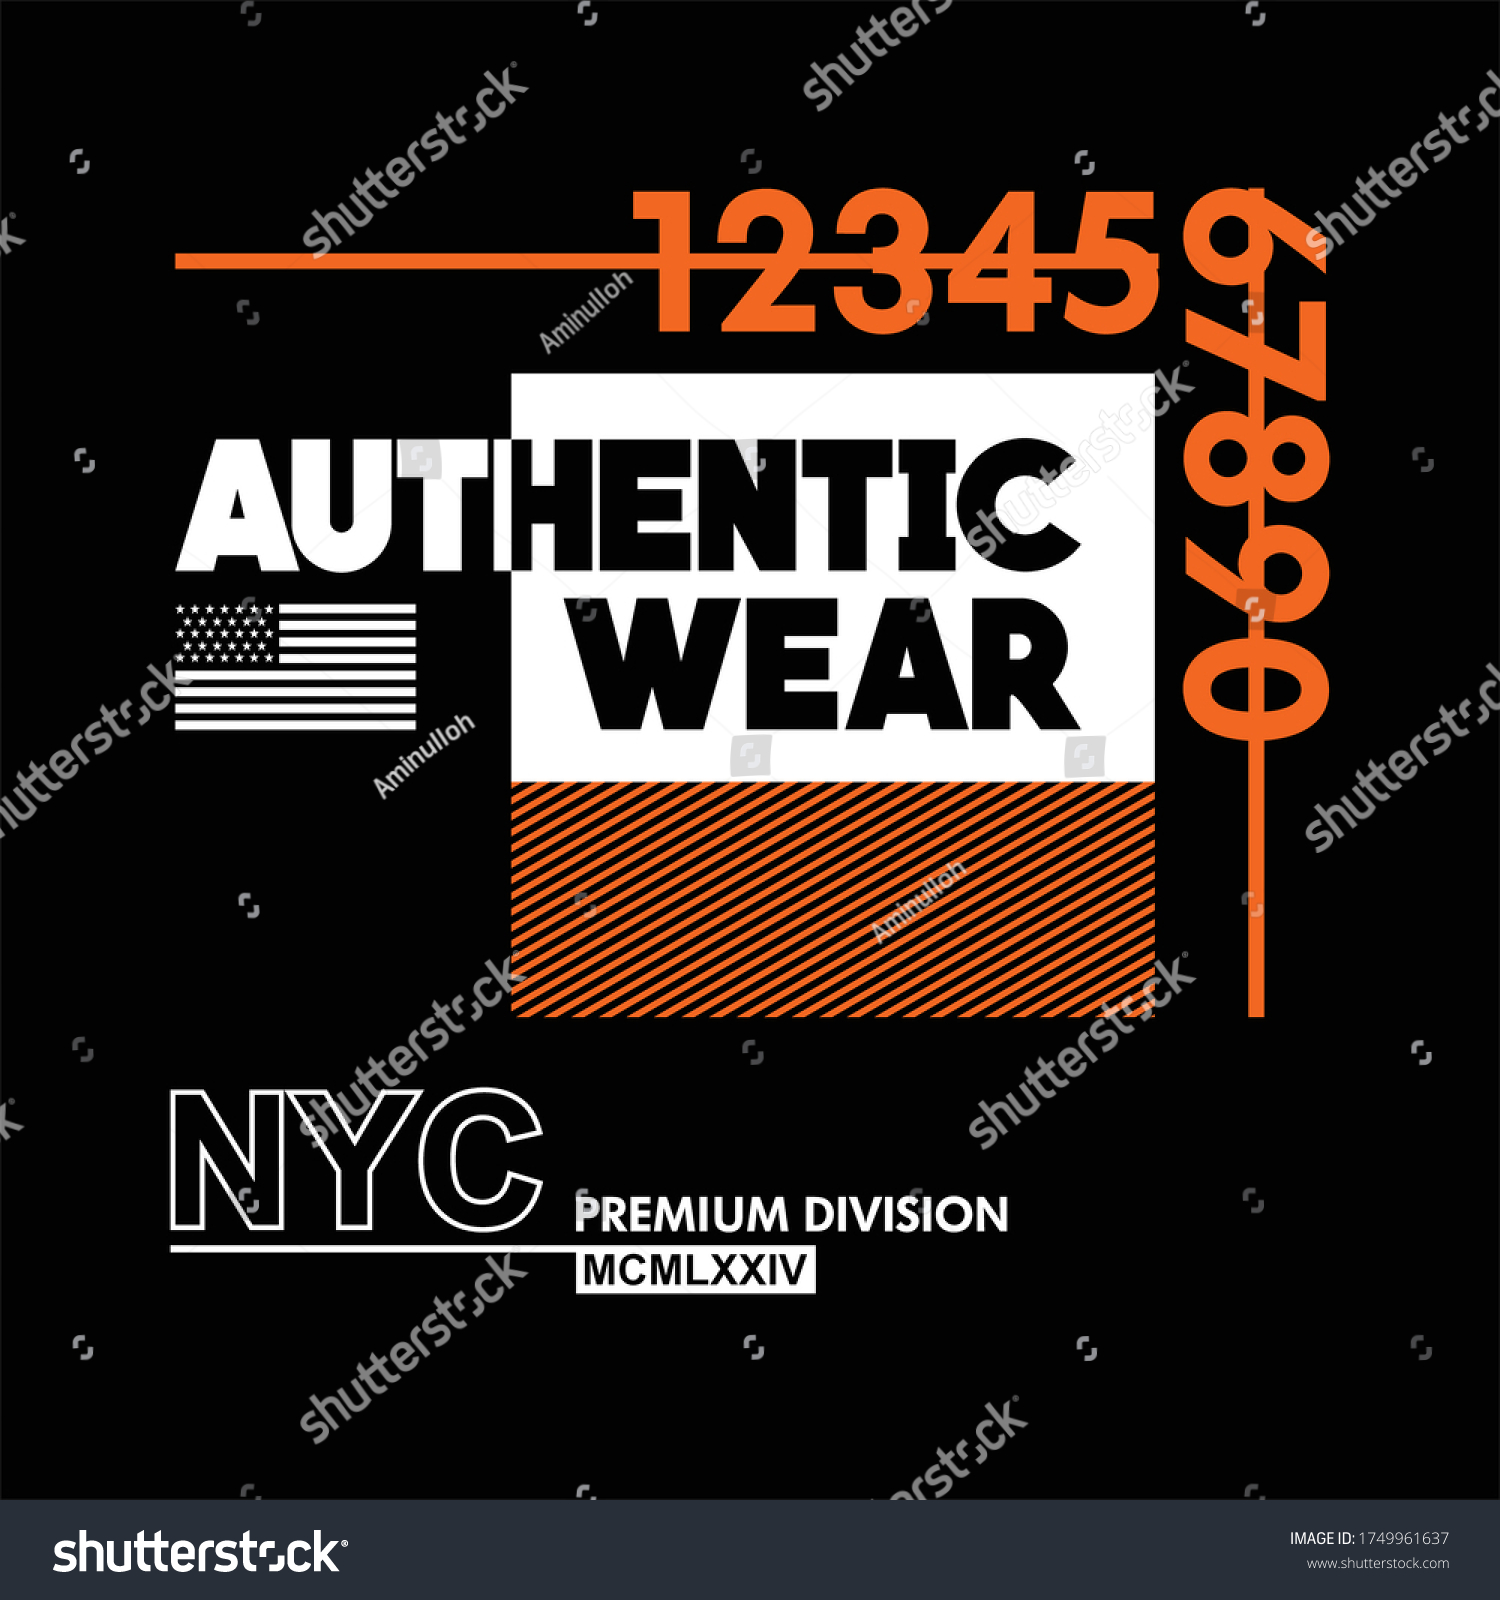 Authentic Wear Nyc Premium Division Streetwear Stock Vector (Royalty ...